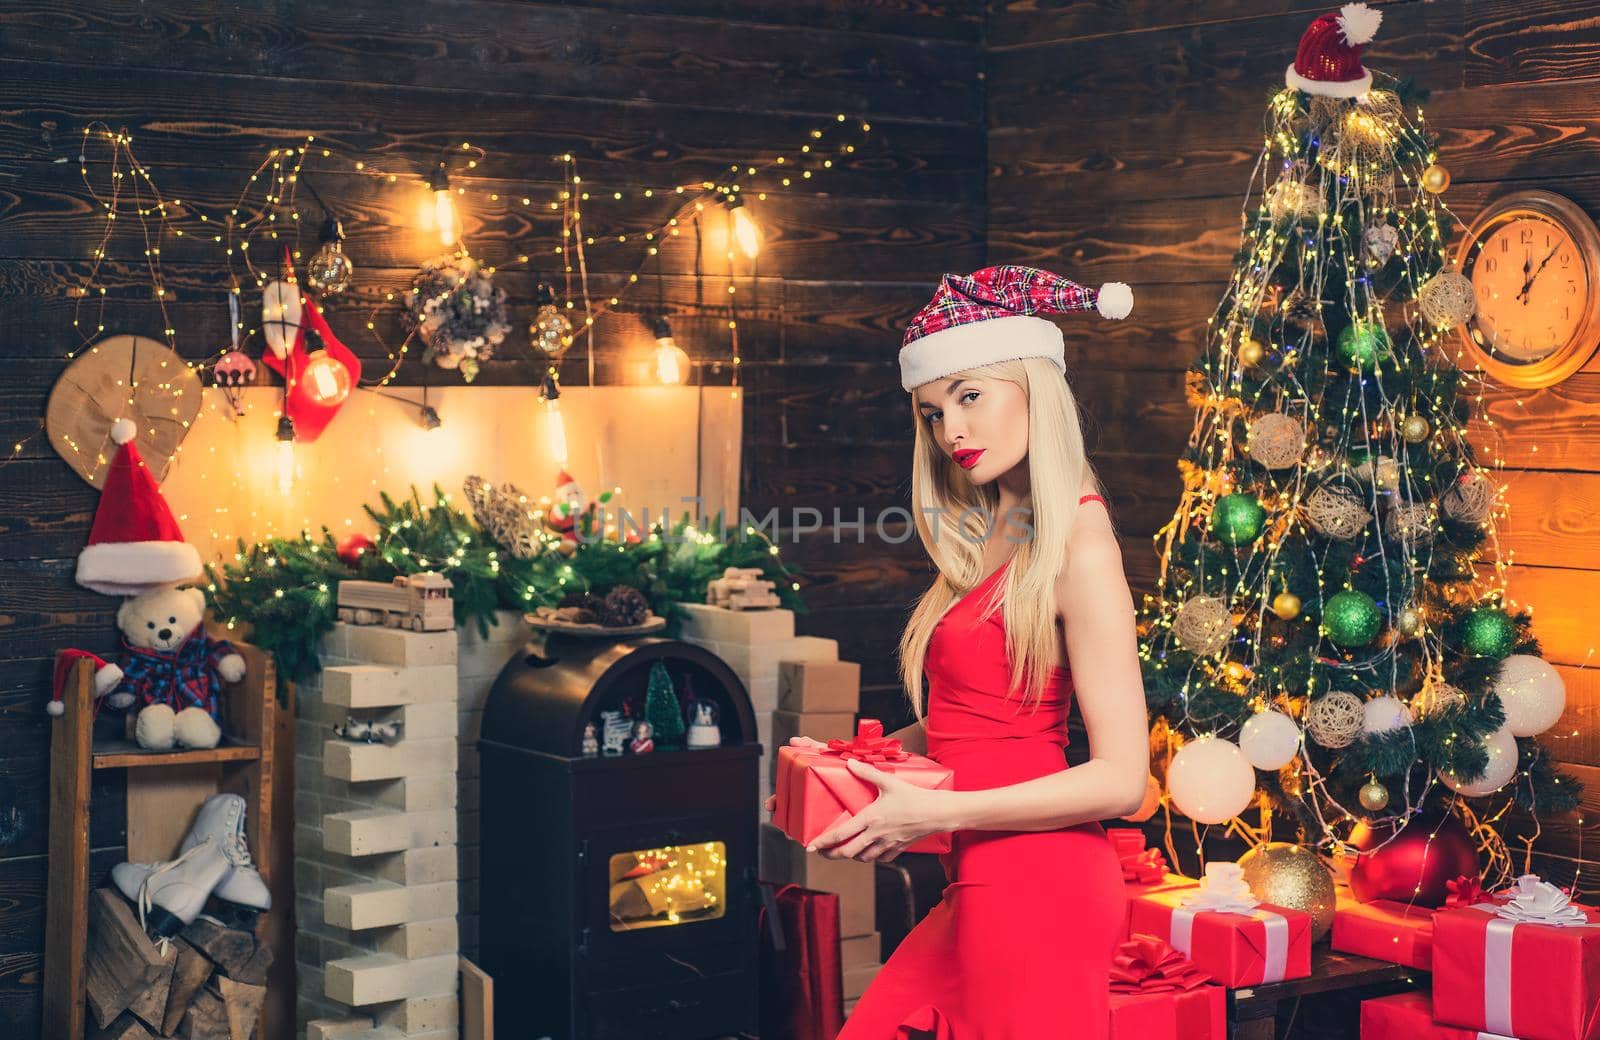 Happy woman with Christmas gift over Christmas interior background. Woman in red dress near the Christmas tree. Colorful makeup and retro hairstyle for Christmas or new year party